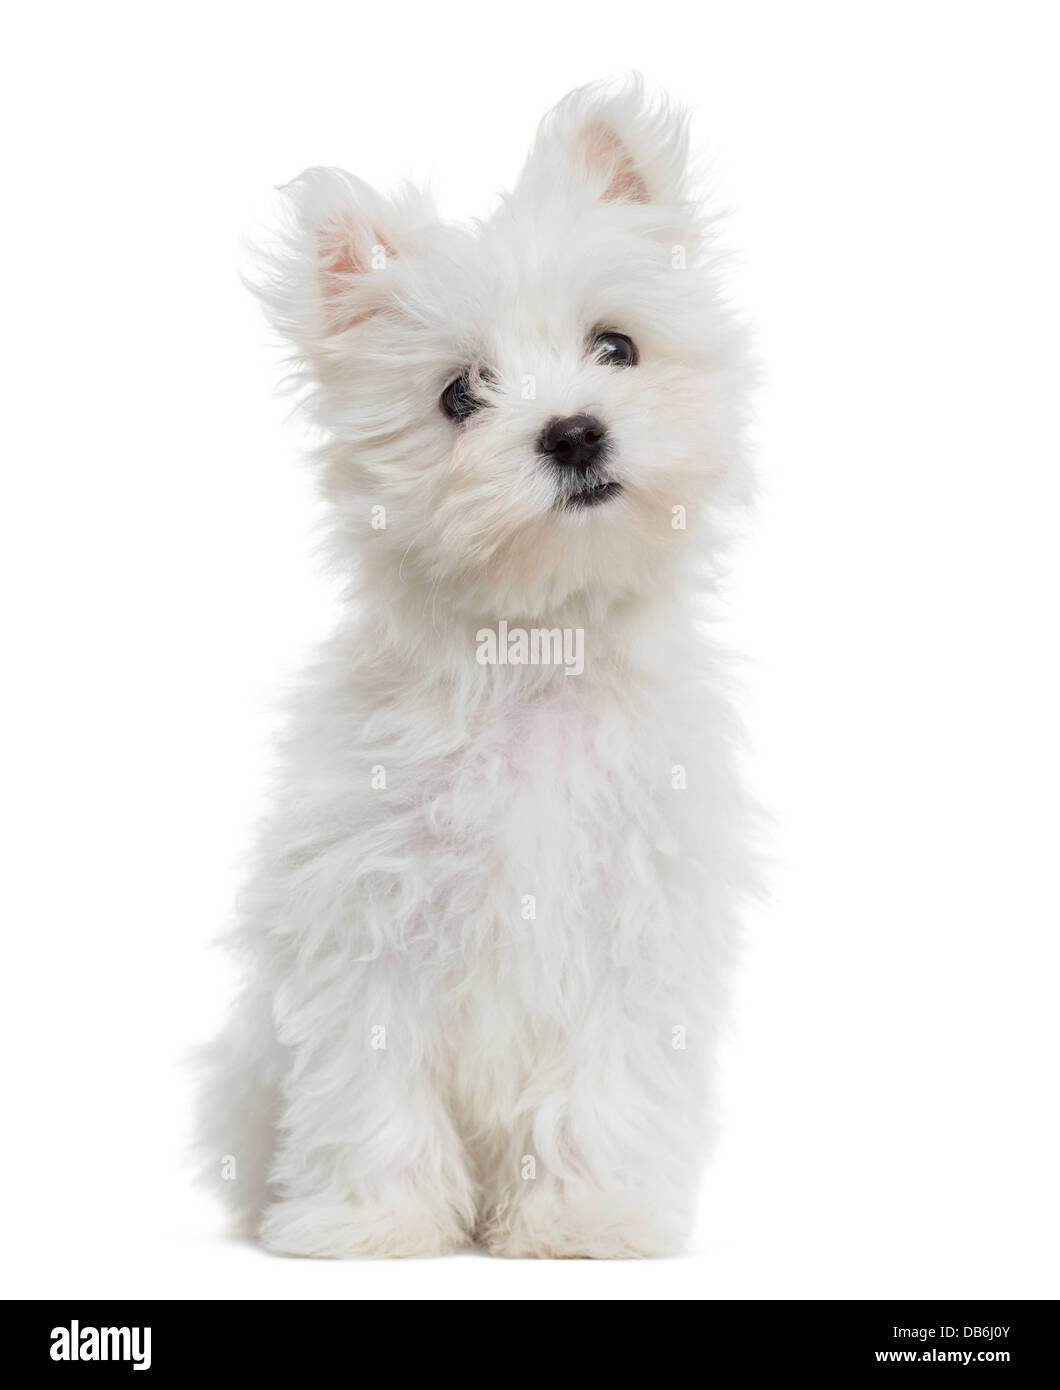 Maltese puppy, 2 months old, standing against white background Stock Photo